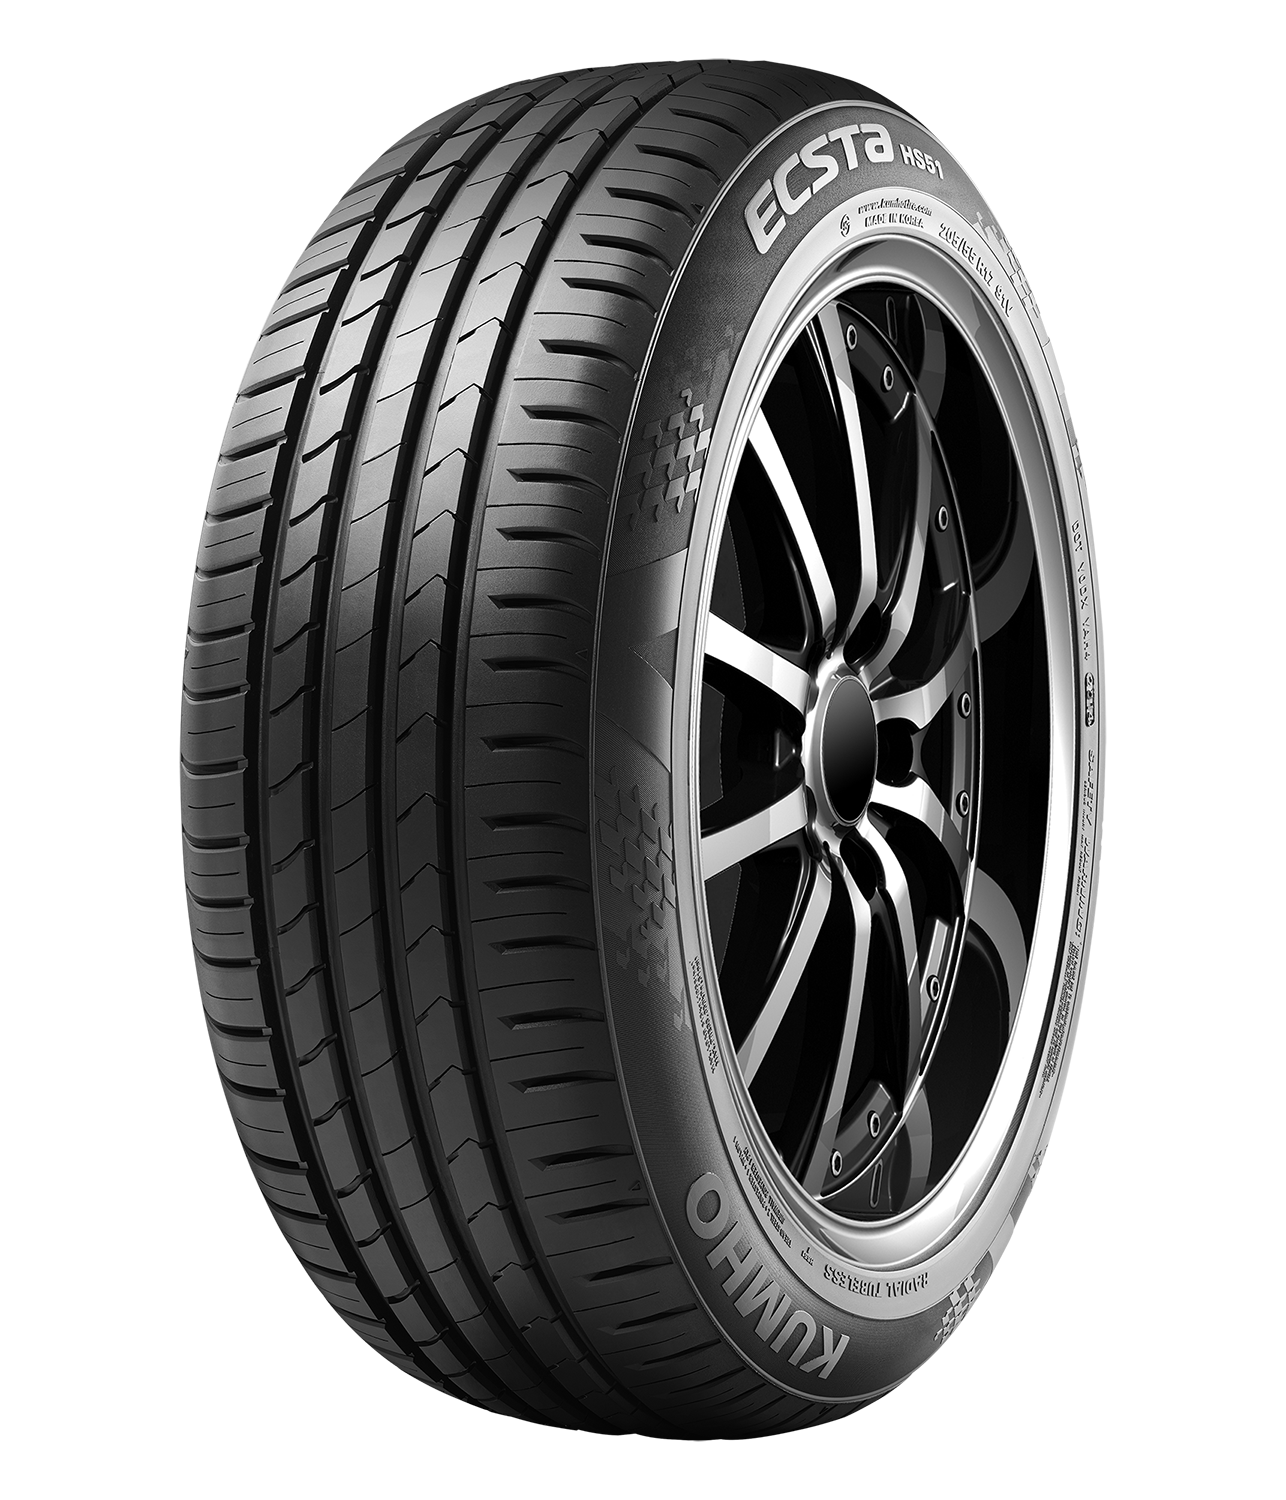 Kumho extends Ecsta high performance range with OE, new size 